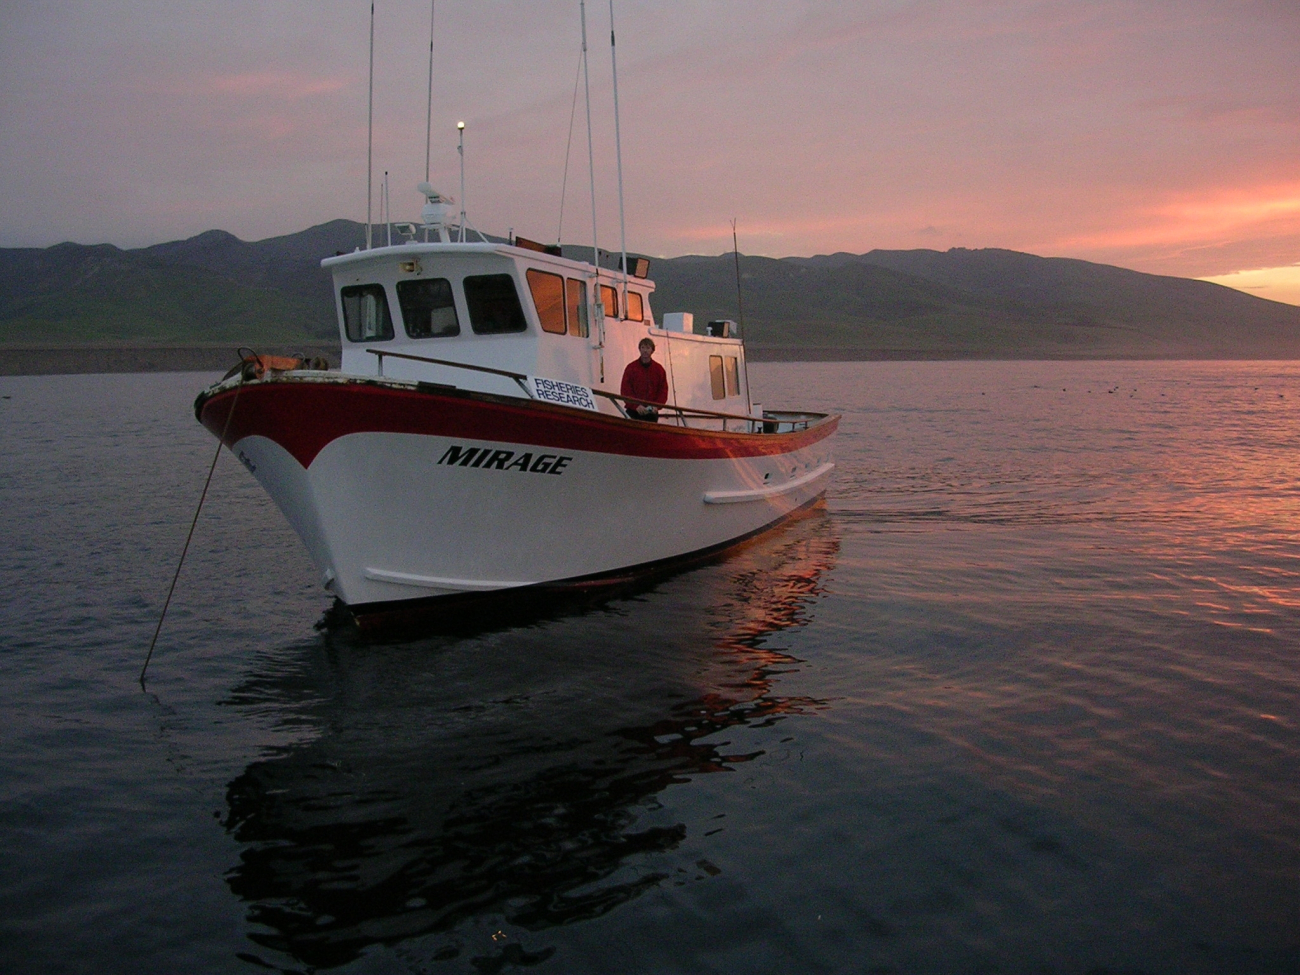 Charter research F/V Mirage at sunrise at Pt